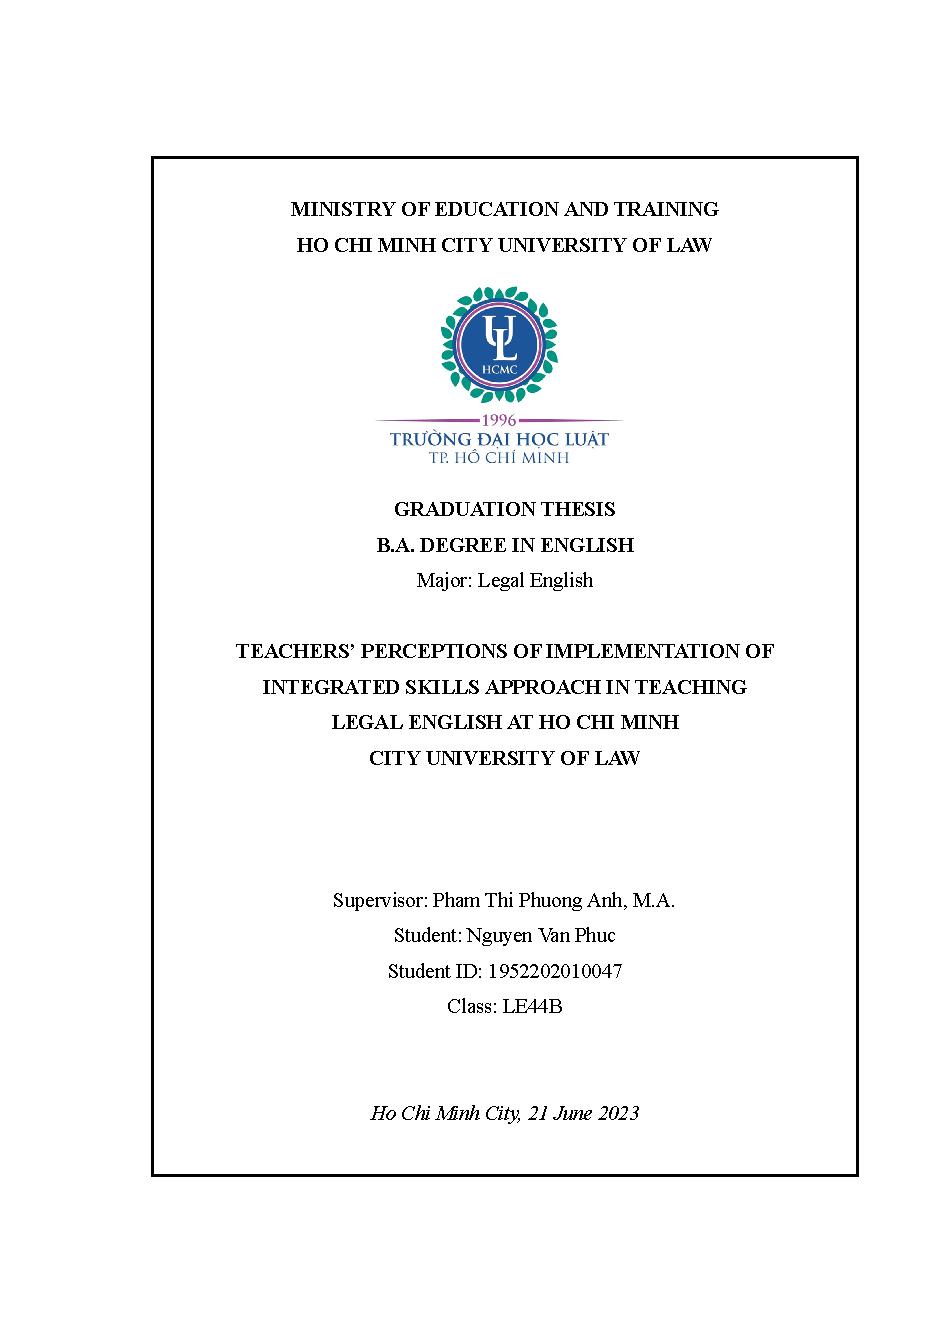 Teachers’ Perceptions the Implementation of Integrated Skills Approach in Teaching Legal English at Ho Chi Minh City University of Law